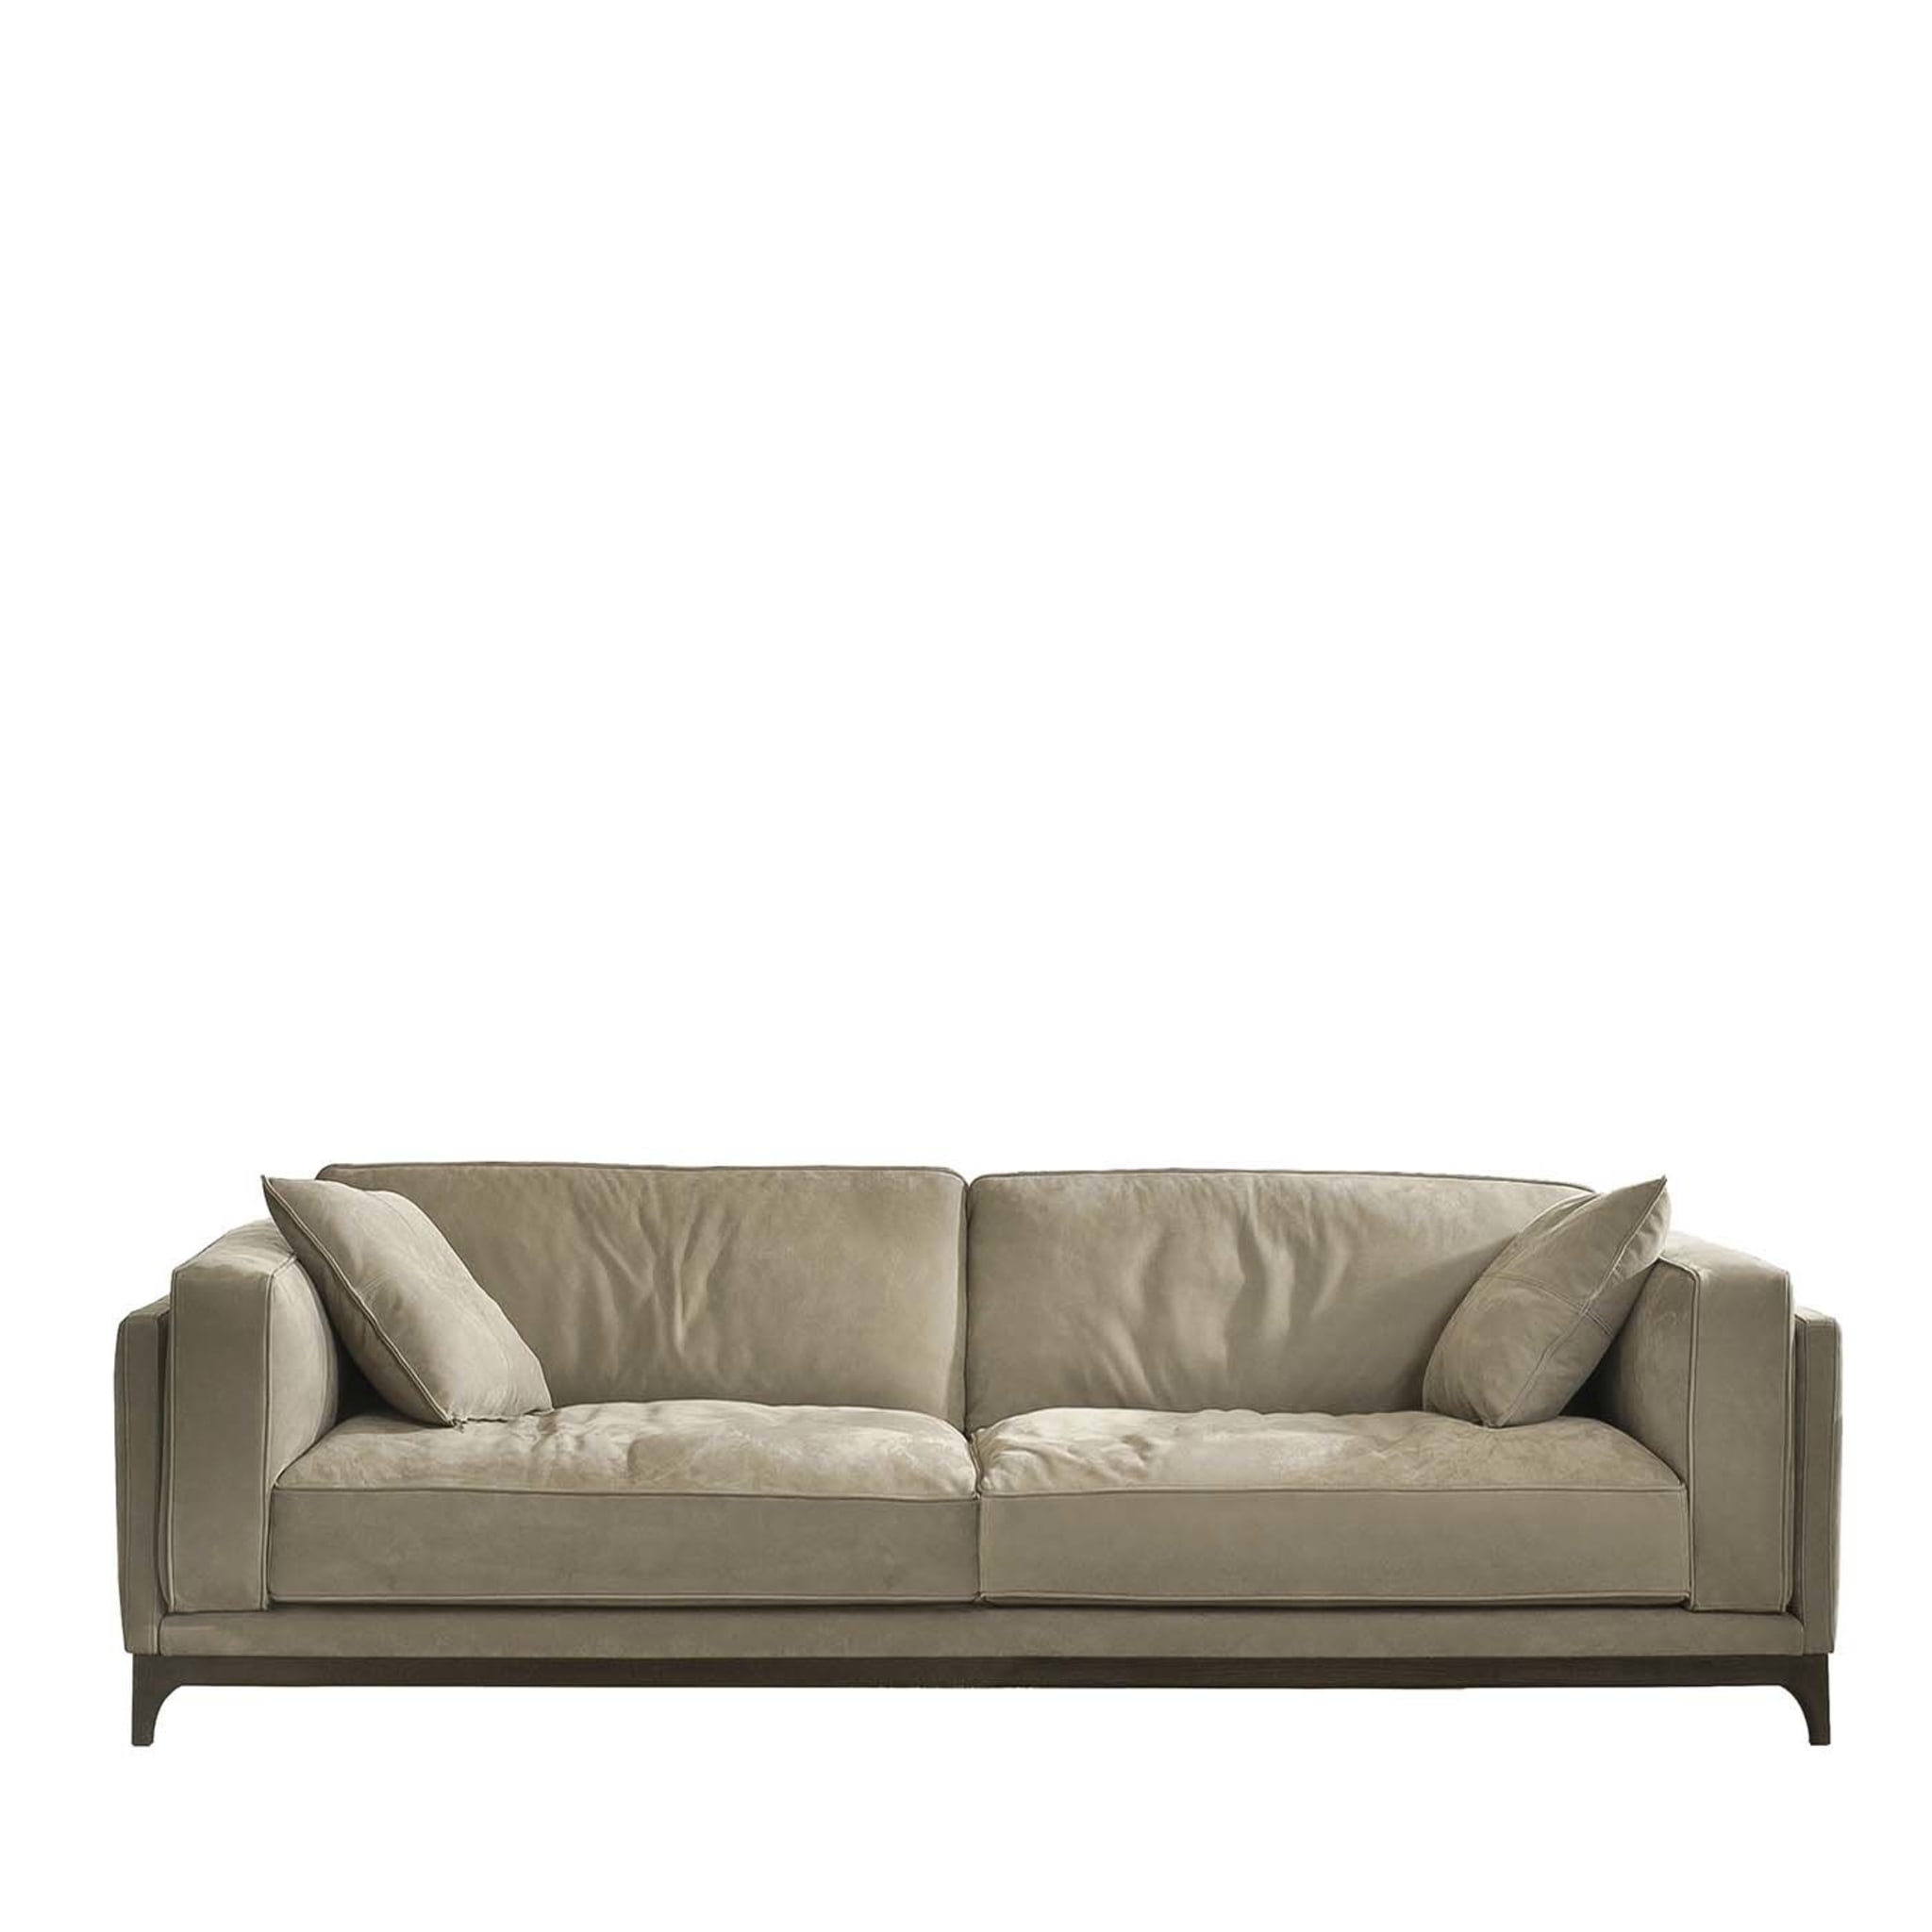 Time Taupe Leather Sofa - Main view